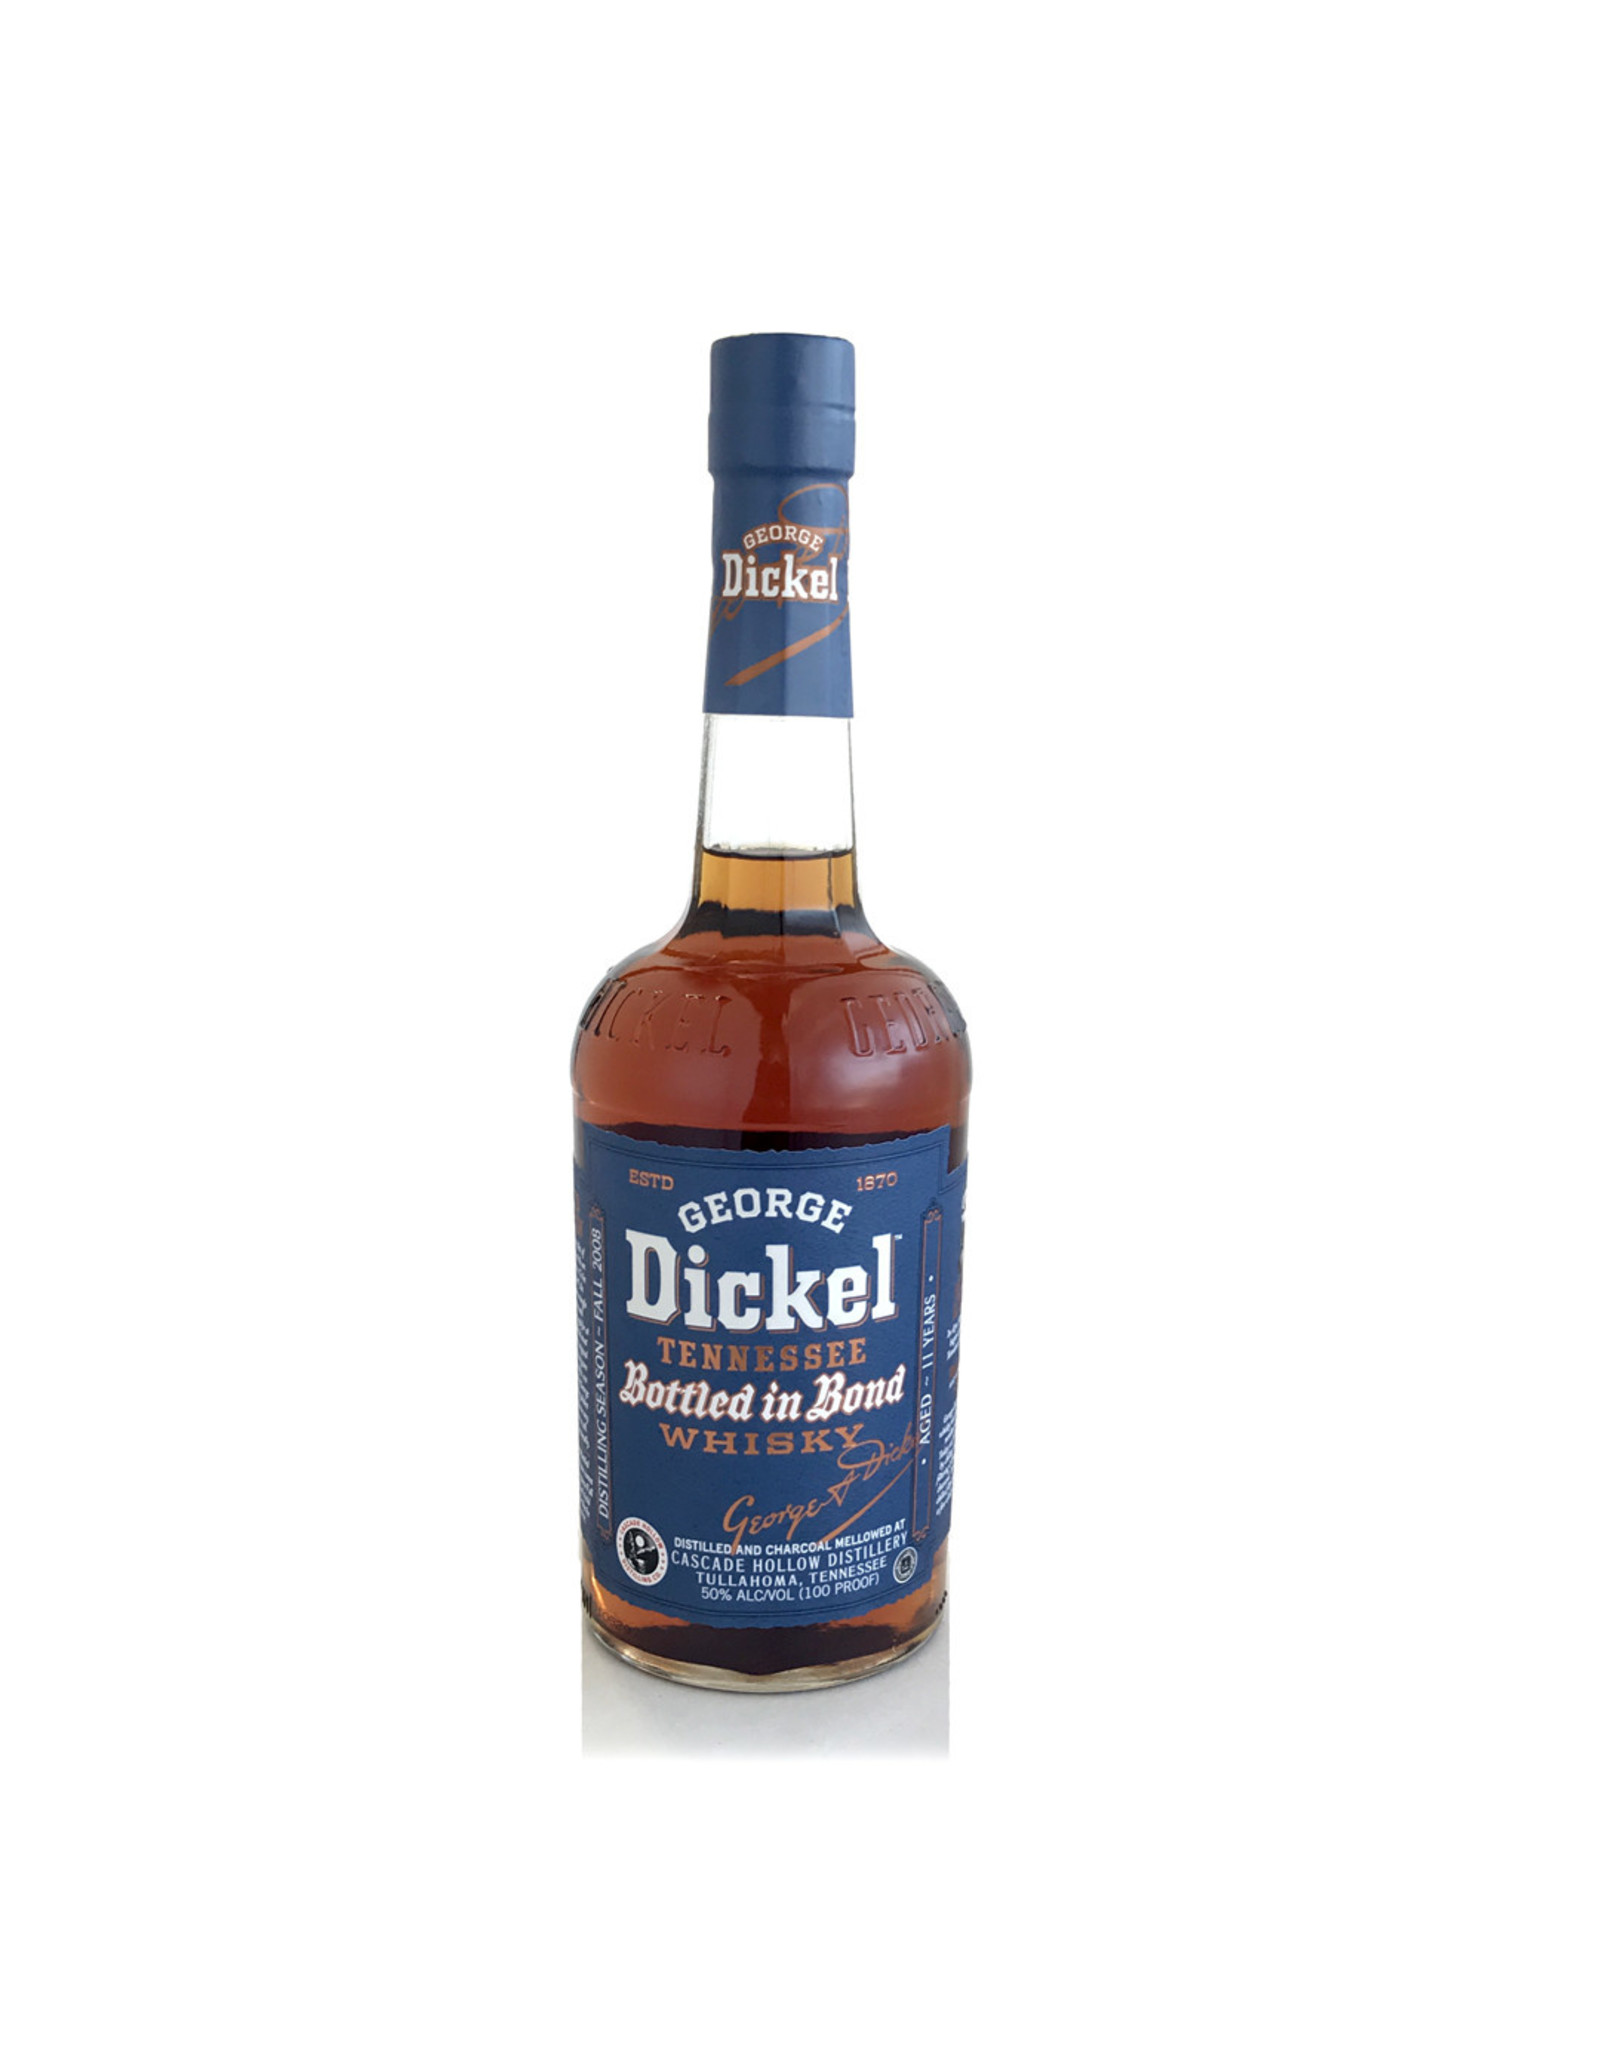 George Dickel Bottled in Bond Tennessee Whisky, Tennessee, 11 Year